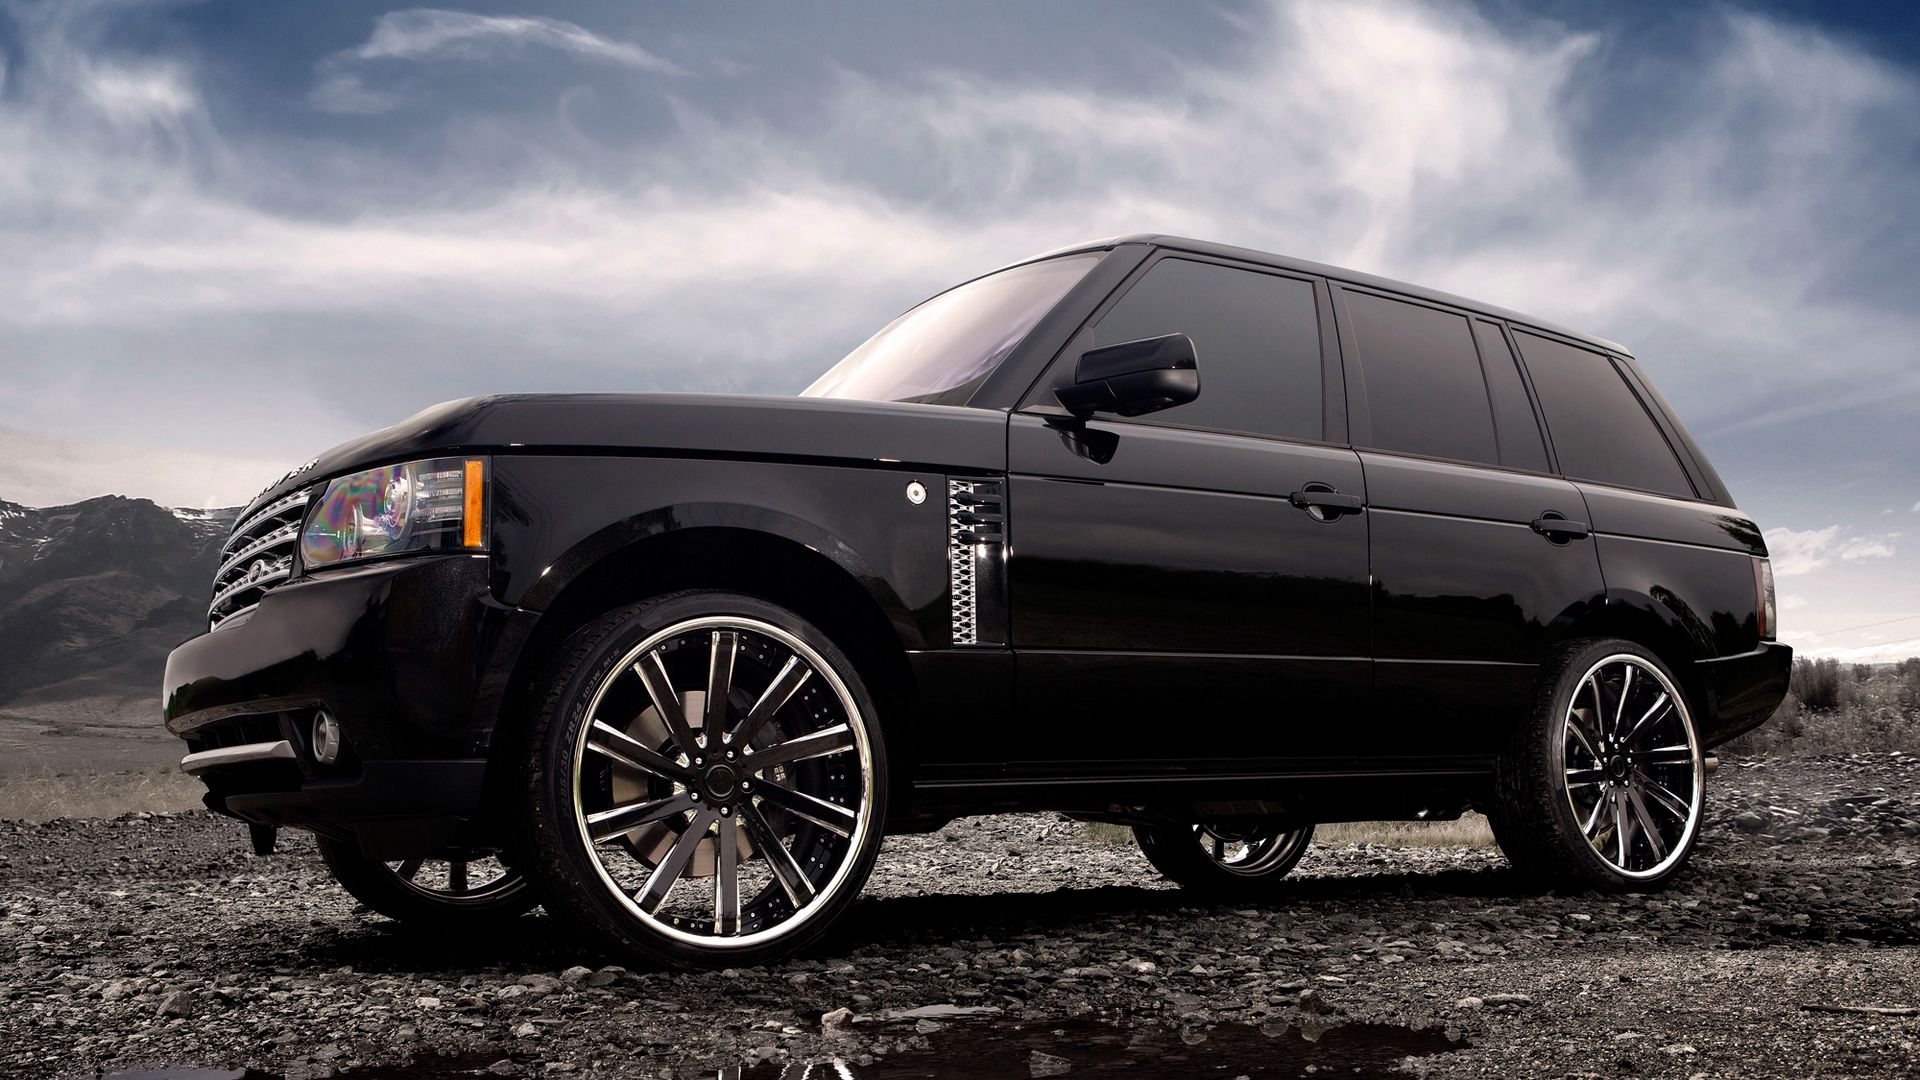 Download wallpaper 1920x1080 range rover, land rover, auto, wheels, tuning,  clouds full hd, hdtv, fhd, 1080p hd background